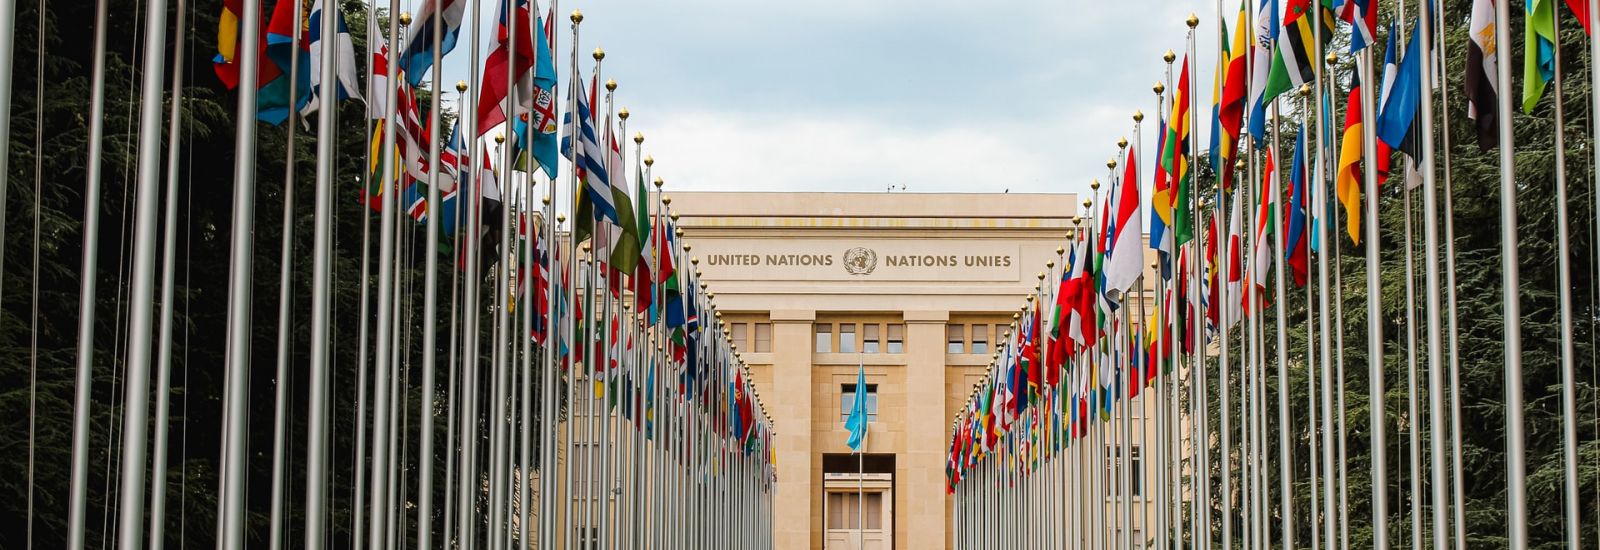 The United Nations office at Geneva, viewed through an avenue of flags of all the member states